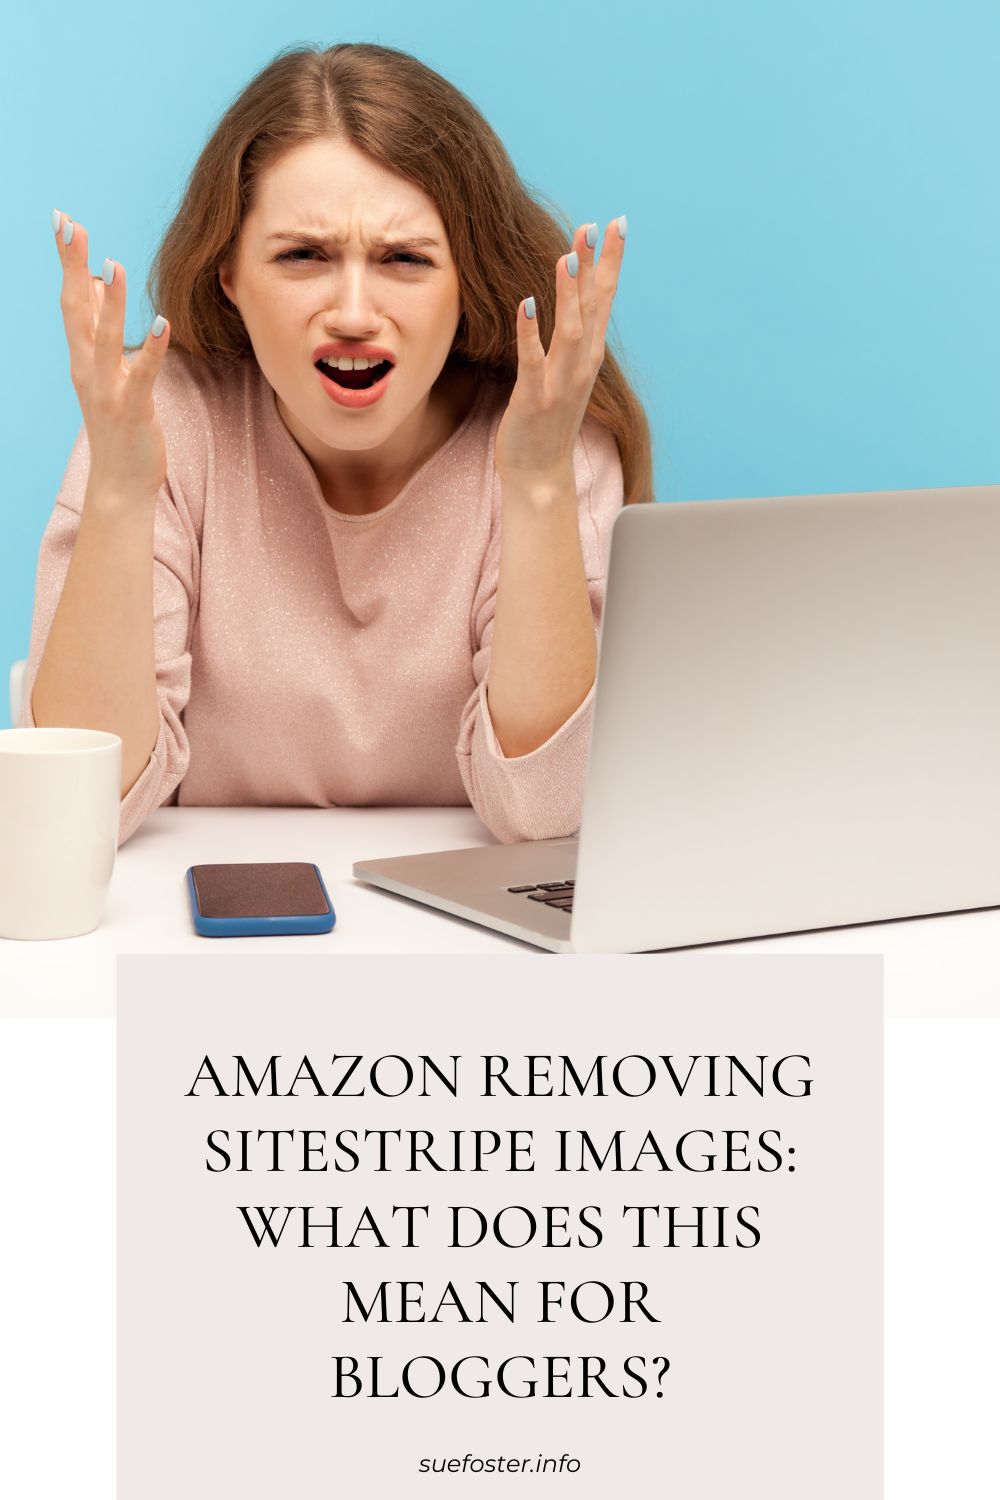 Bloggers are faced with challenges as Amazon removes SiteStripe images. Explore the impact and find alternative solutions for Amazon affiliates.